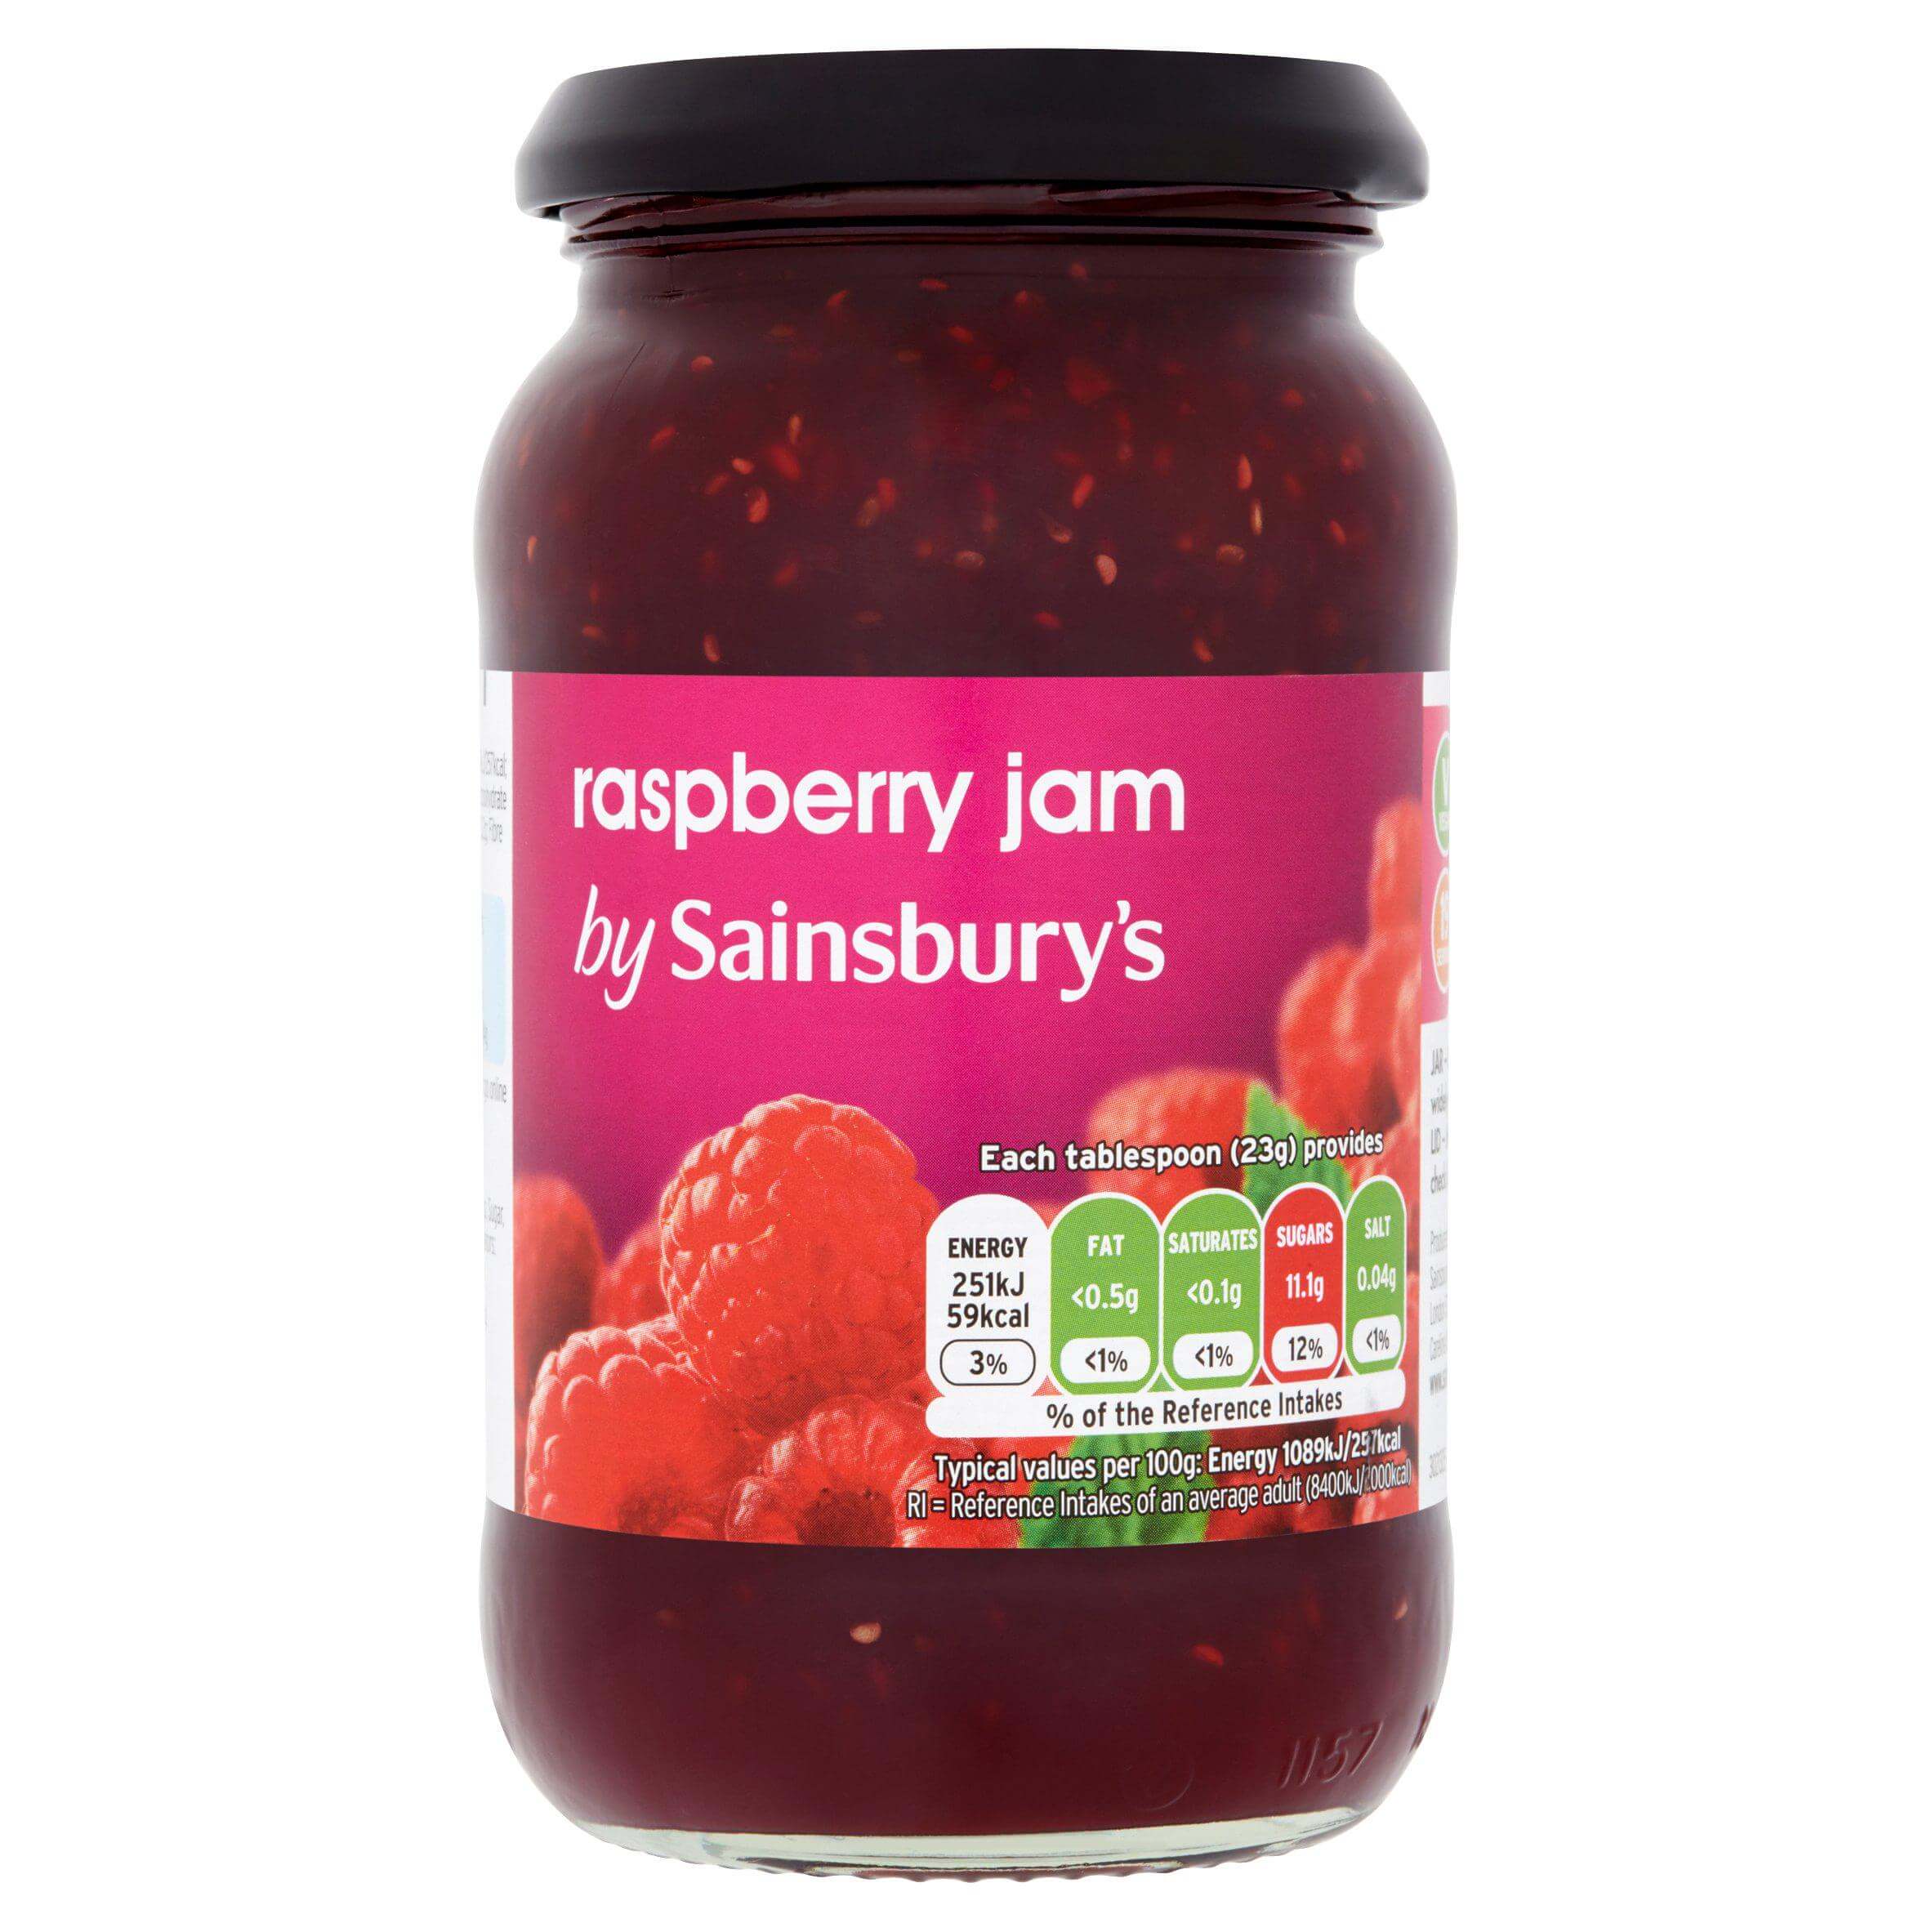 Image of Sainsburys Raspberry Jam by Sainsbury's, designed, produced or made in the UK. Buying this product supports a UK business, jobs and the local community.